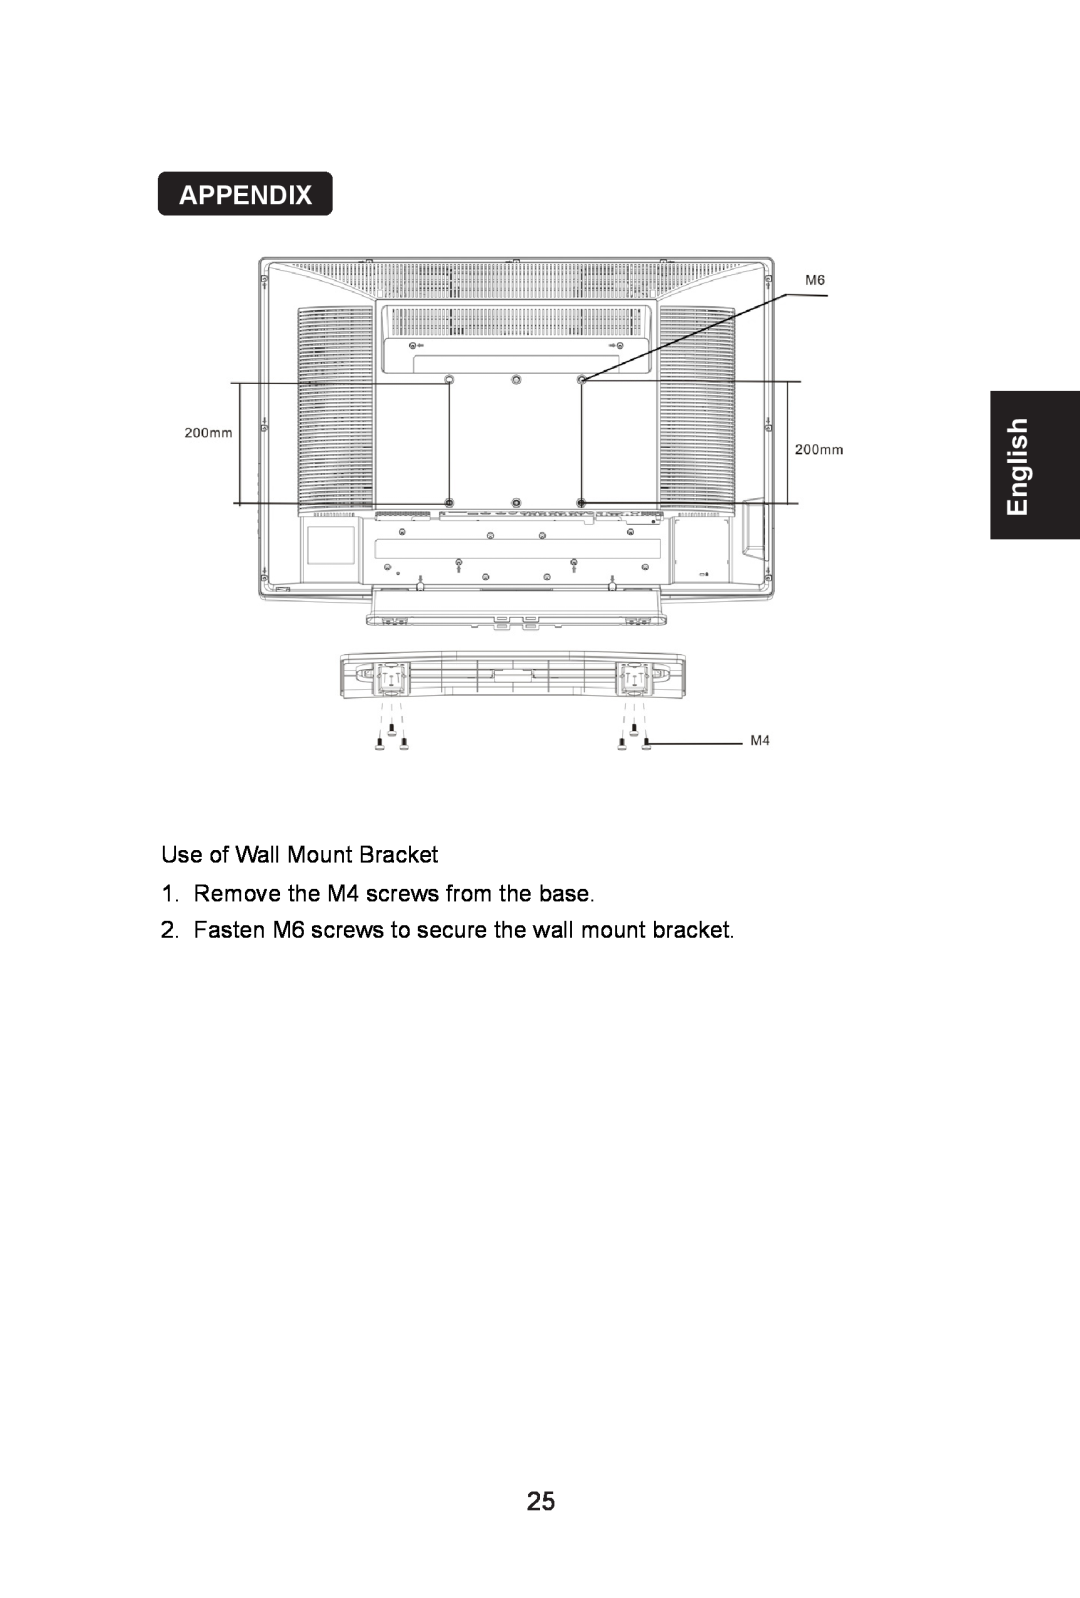 AOC L26W661 user manual Appendix, English, Use of Wall Mount Bracket 1. Remove the M4 screws from the base 